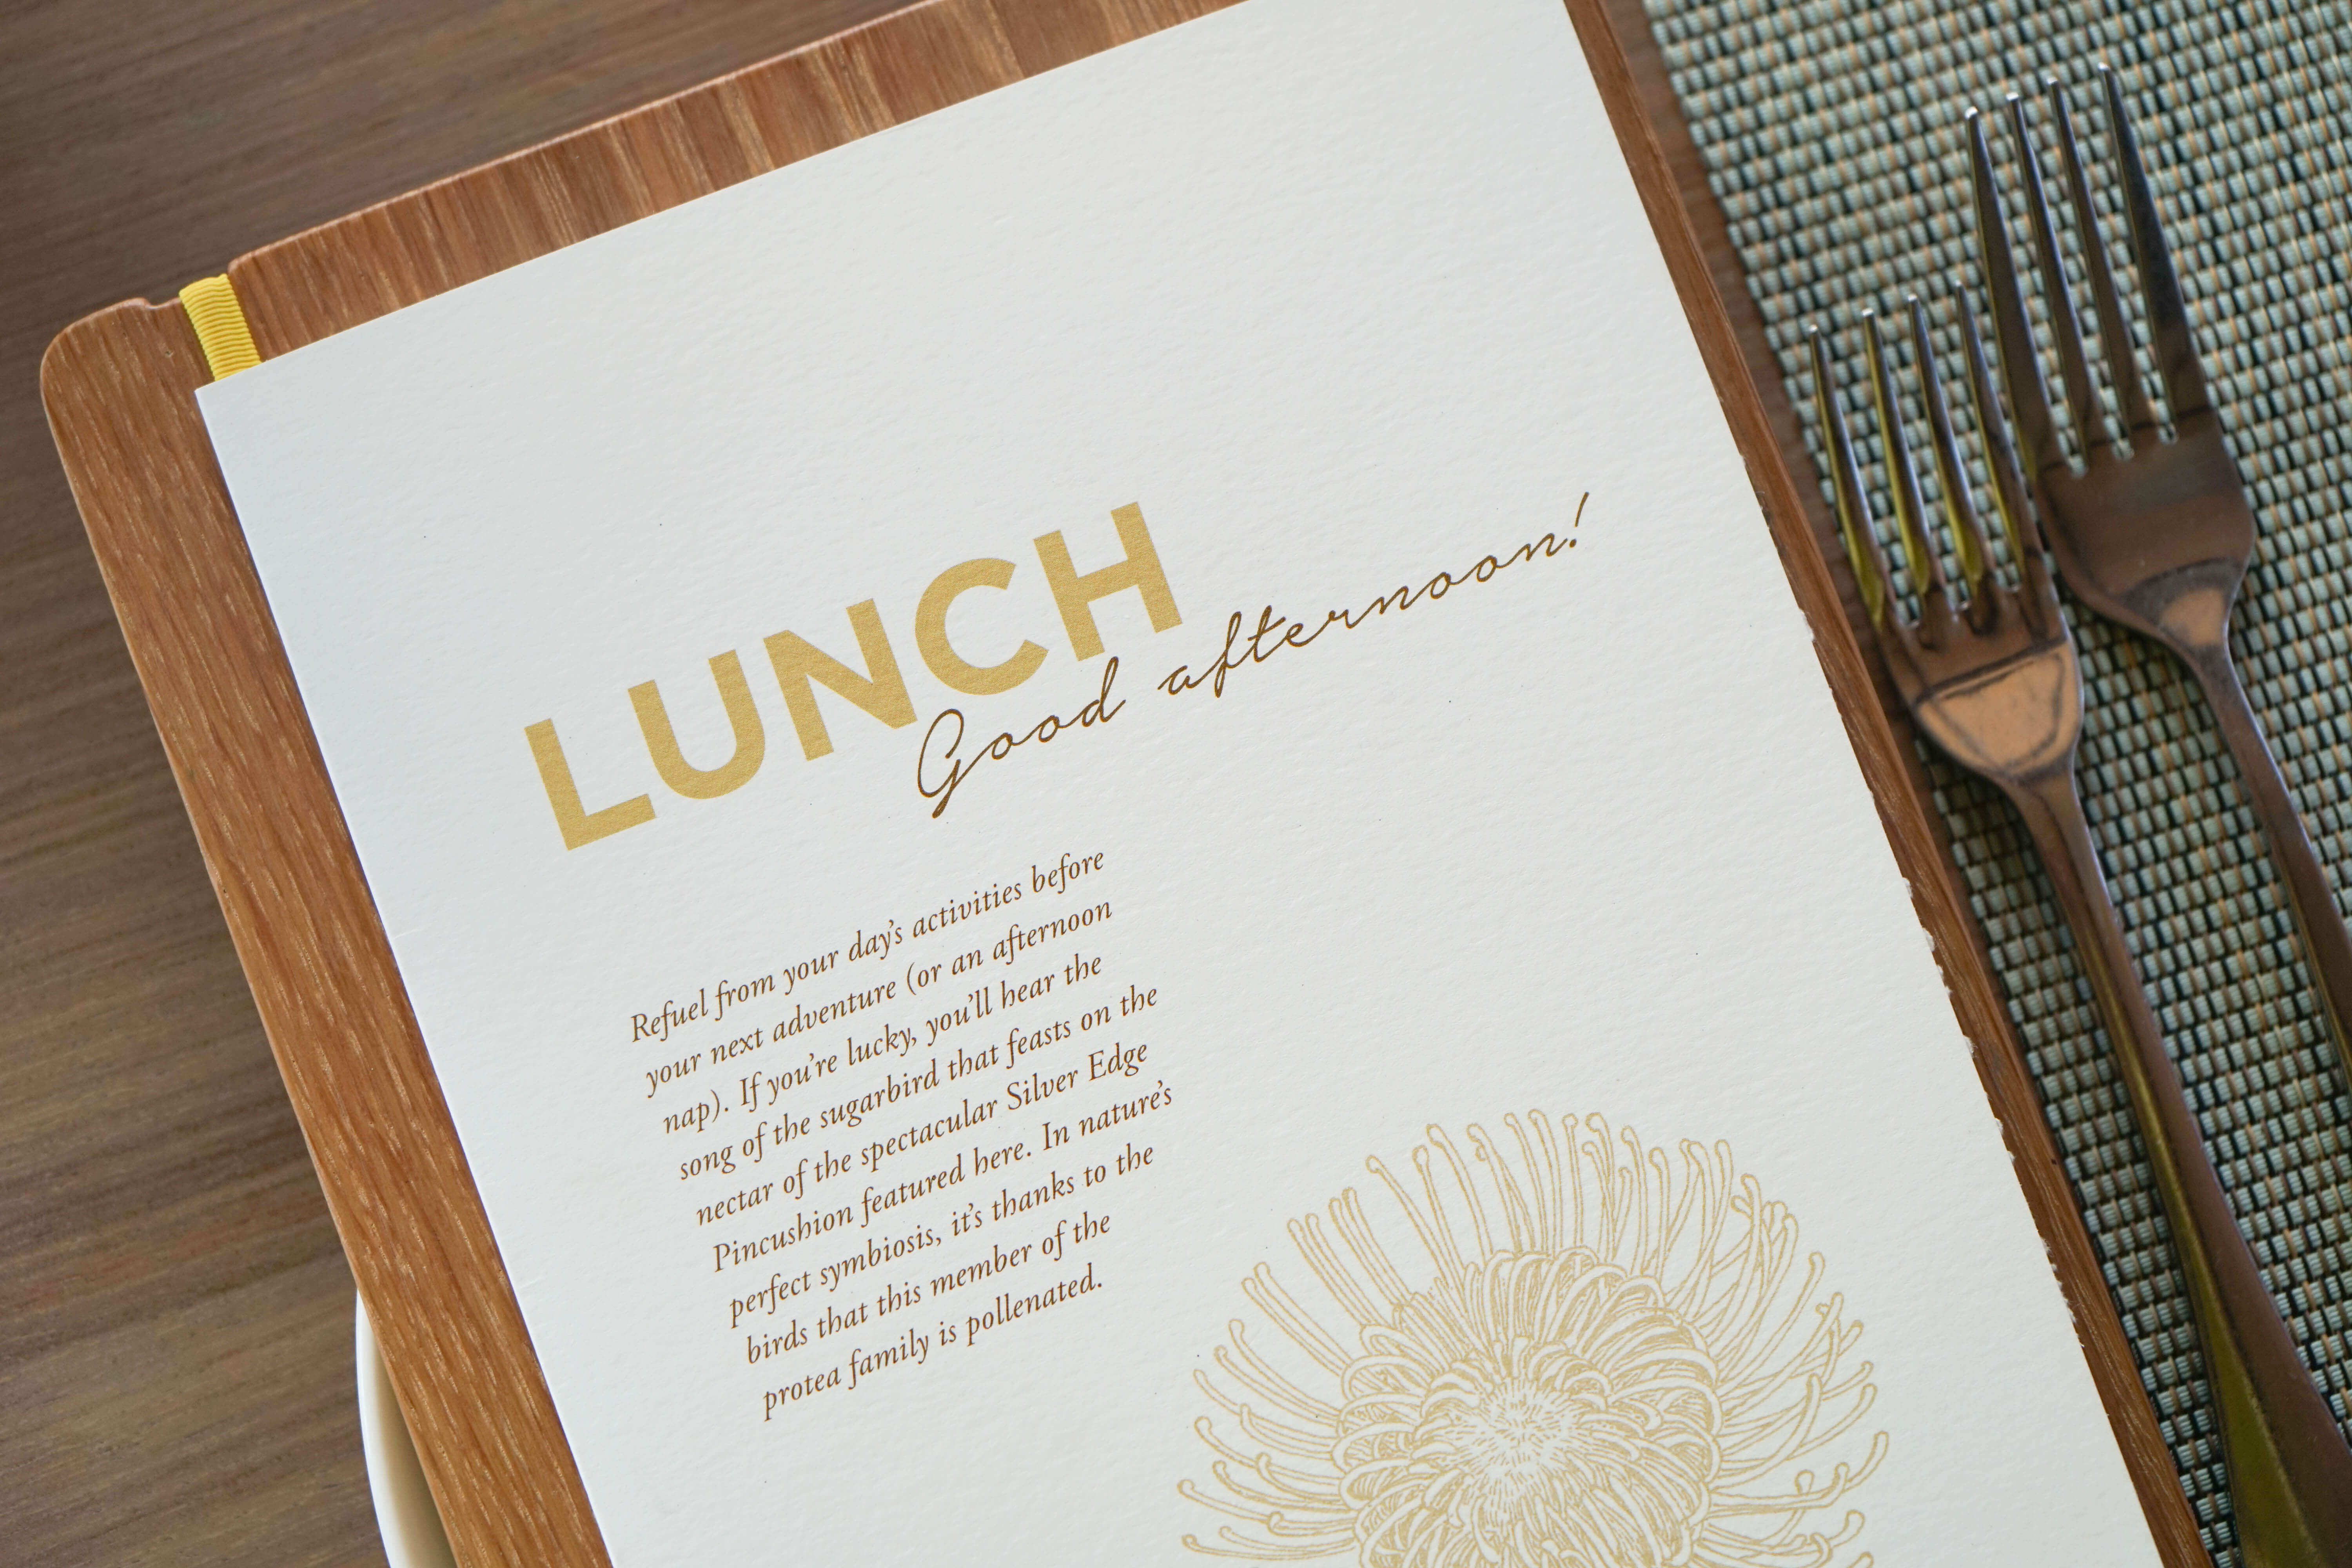 Grootbos Private Nature Reserve - Lunch Menu